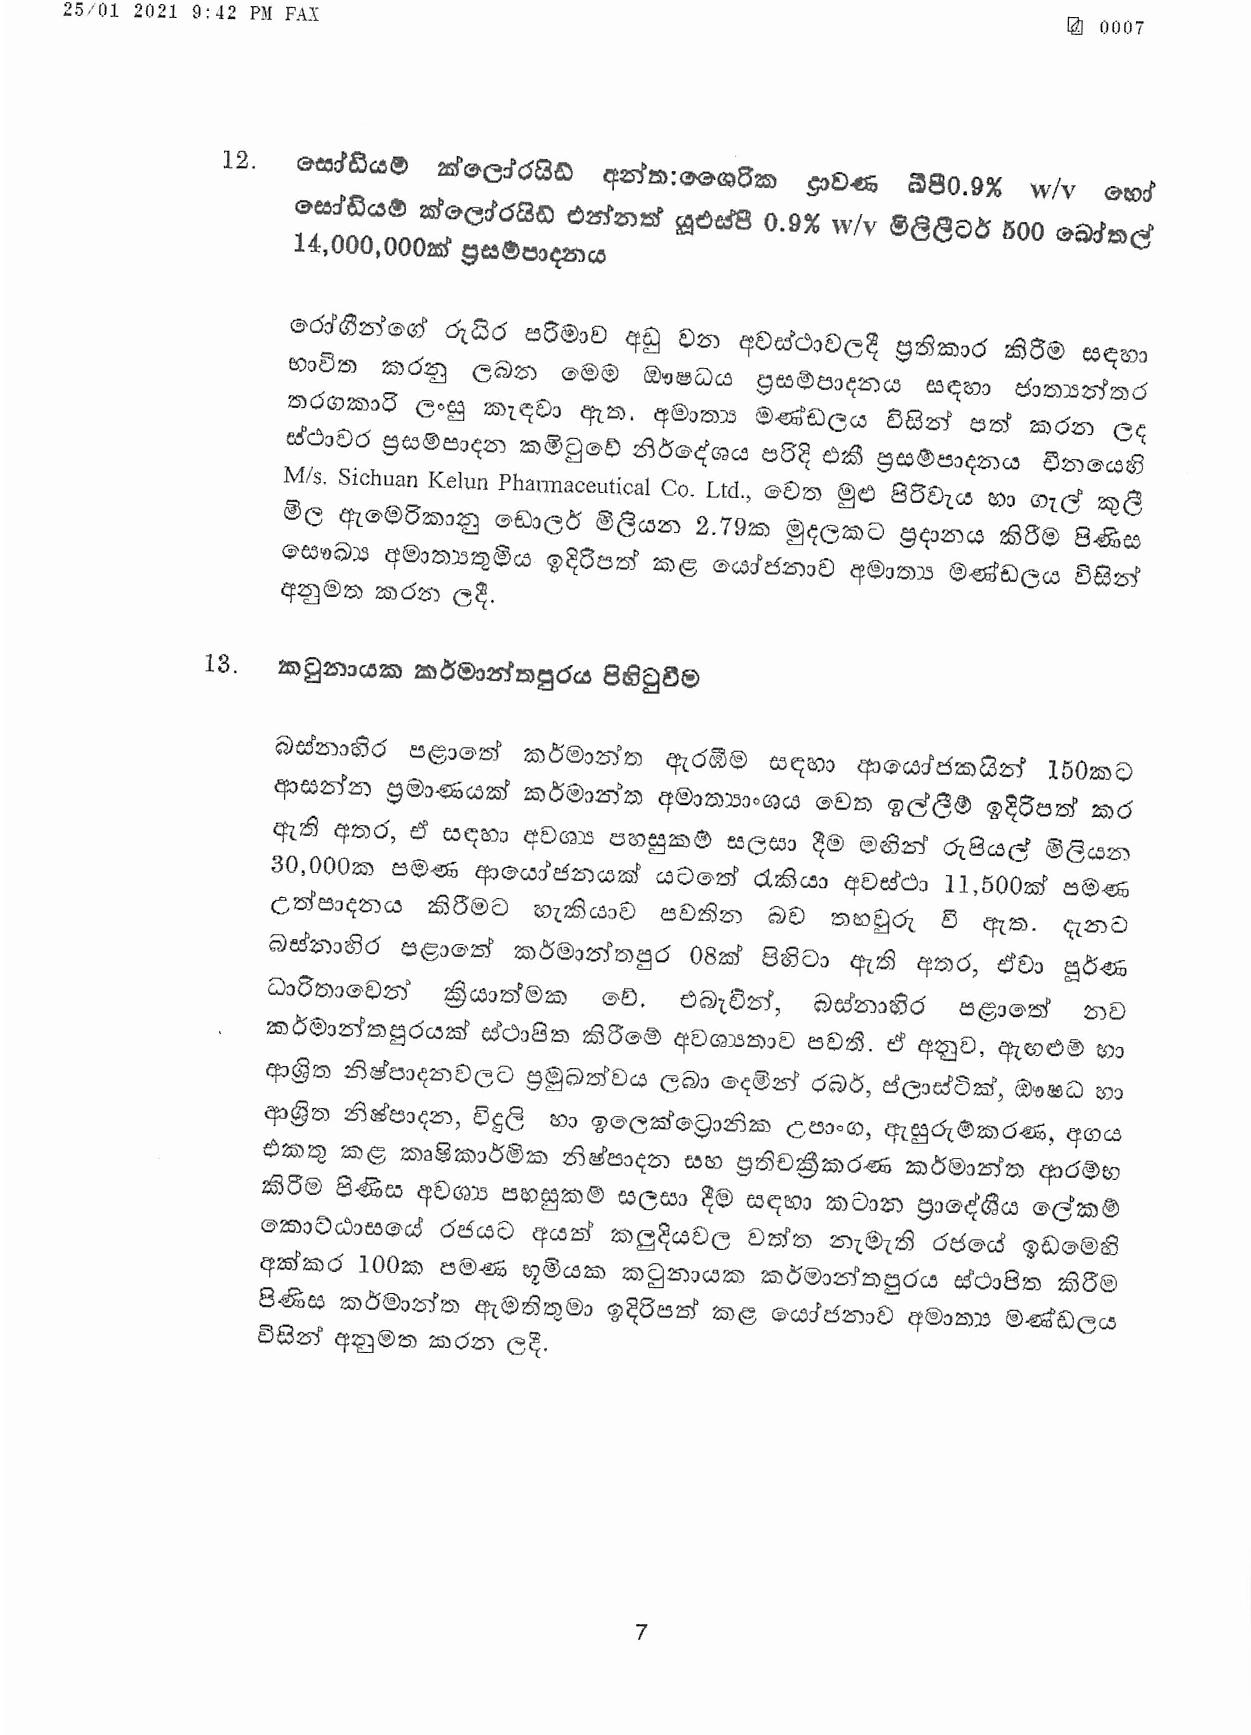 Cabinet Decision on 25.01.2021 page 007